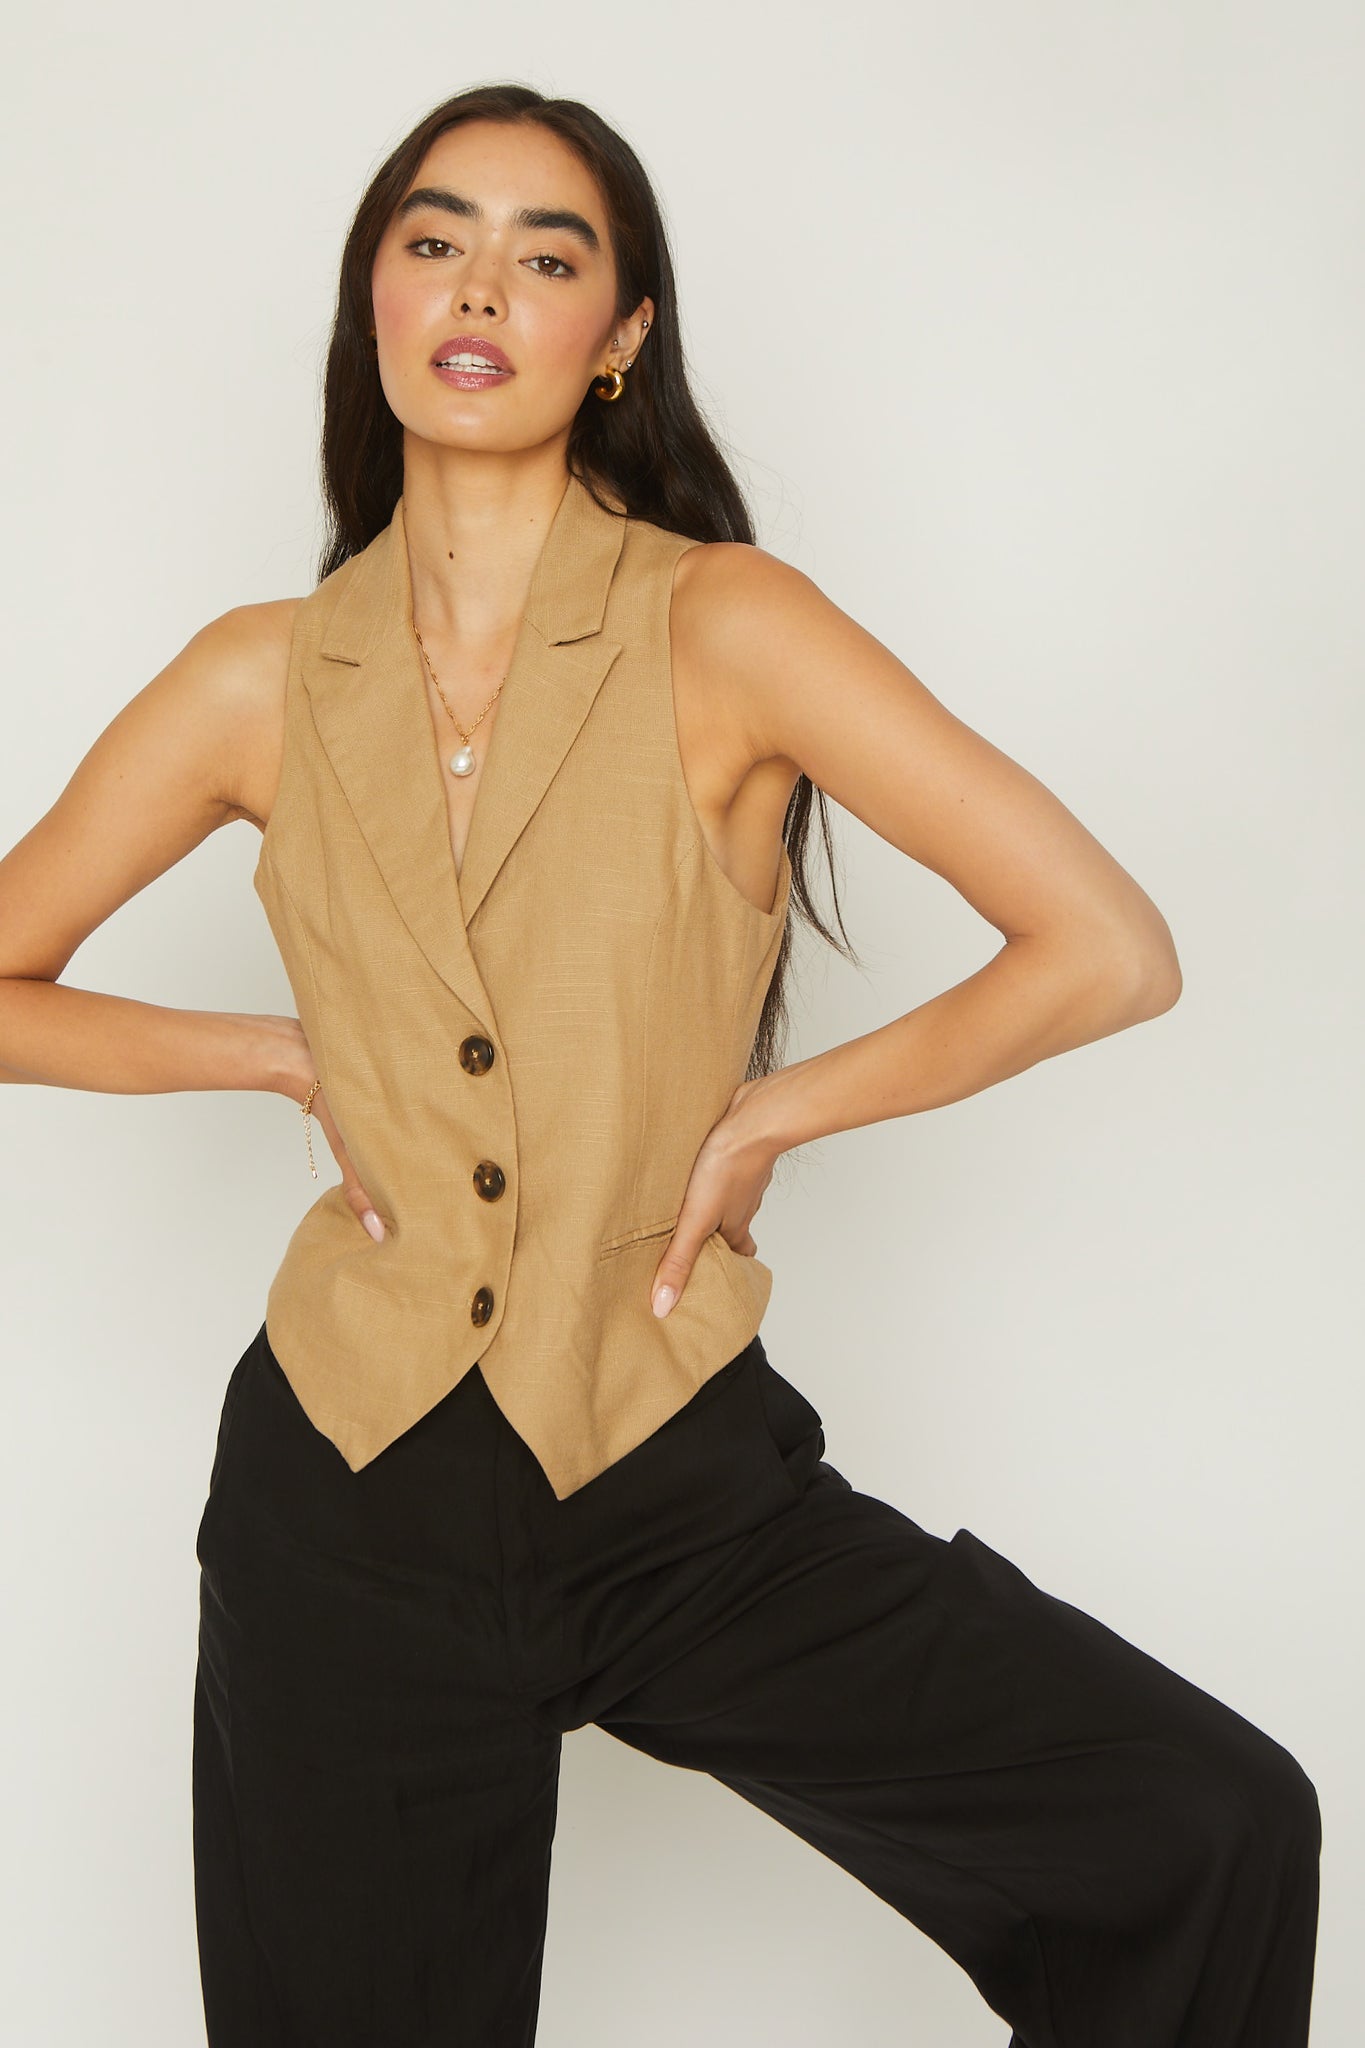 V Neck Linen Vest Lapel Collar Slightly Fitted Silhouette Sleeveless Latte Beige Color-Way Workwear Office Wear Professional Womens Style Fashion Neutral Staple Style